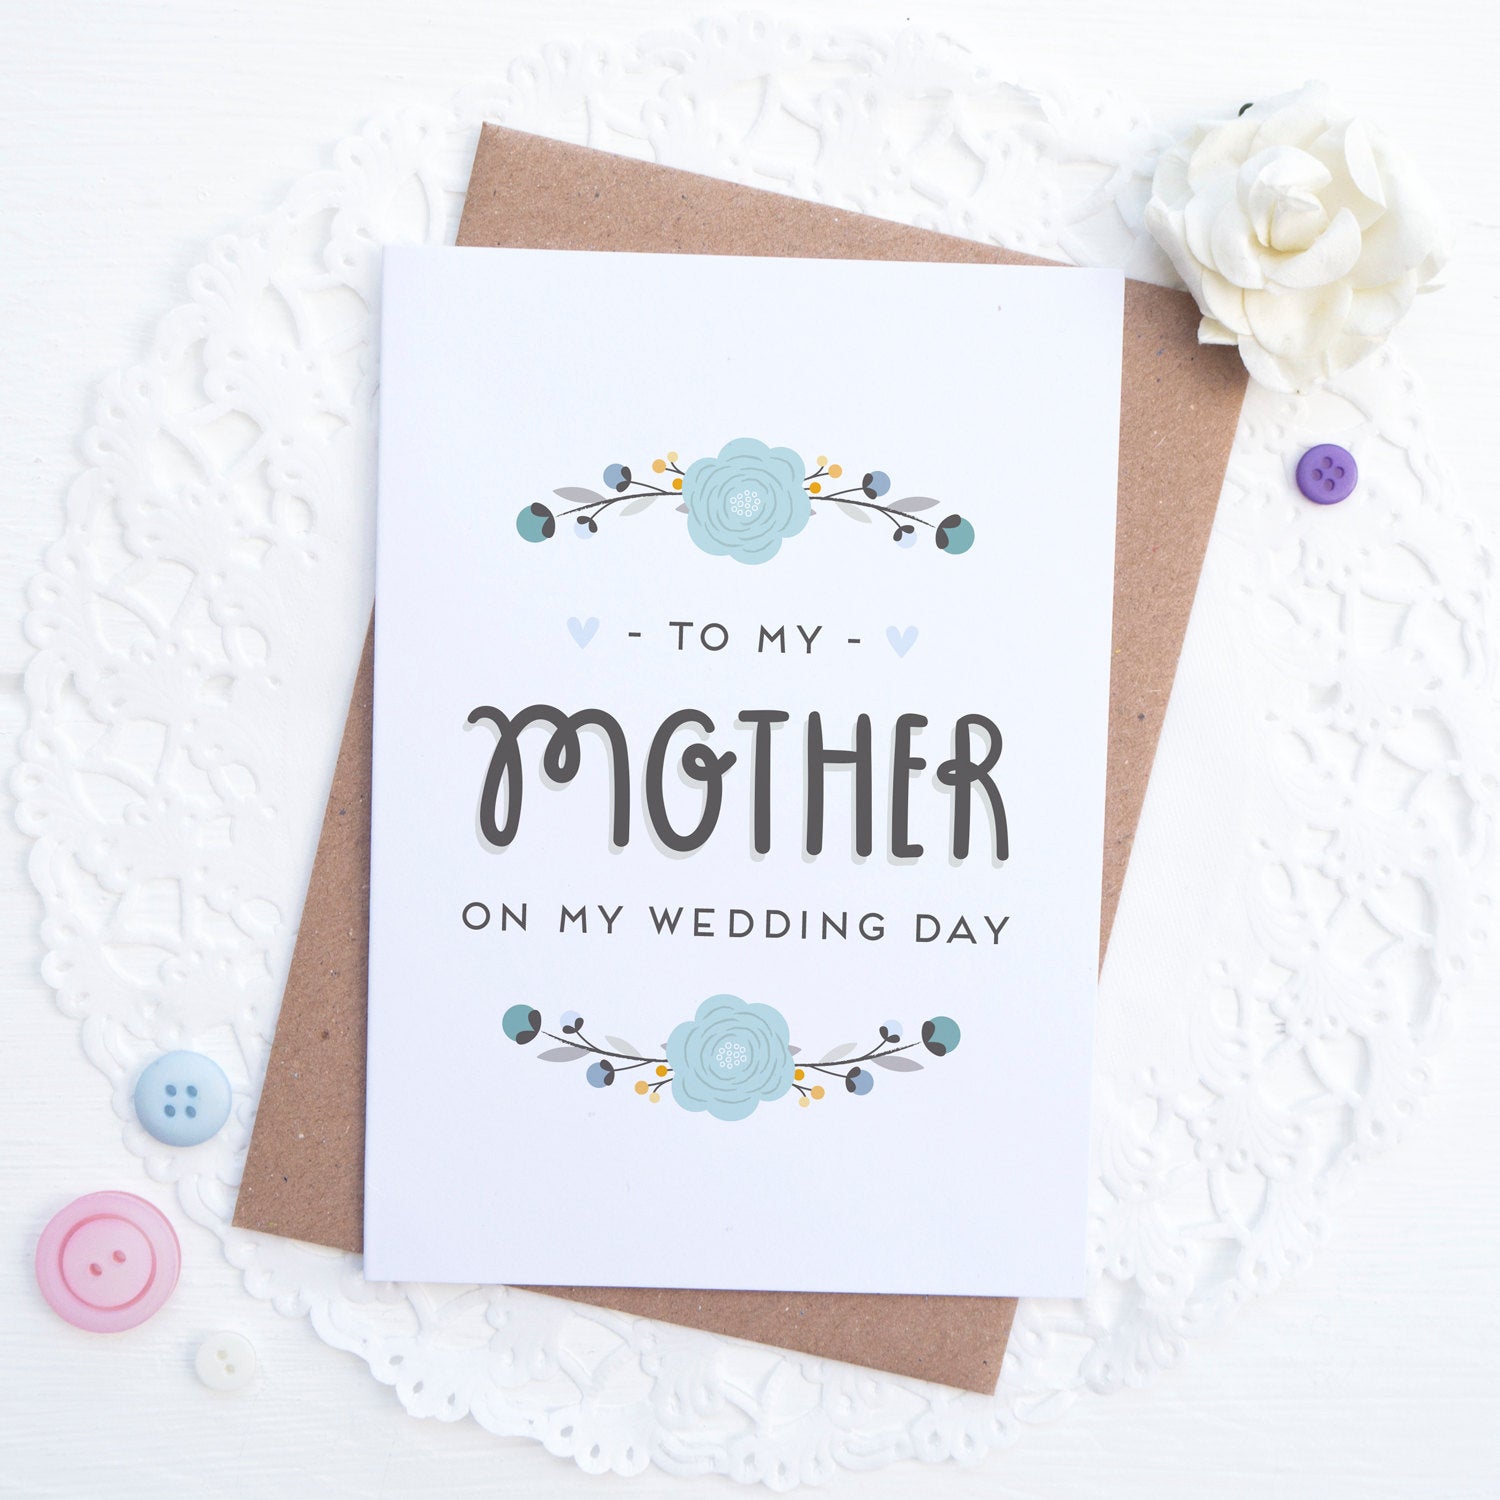 To my mother on my wedding day card in blue